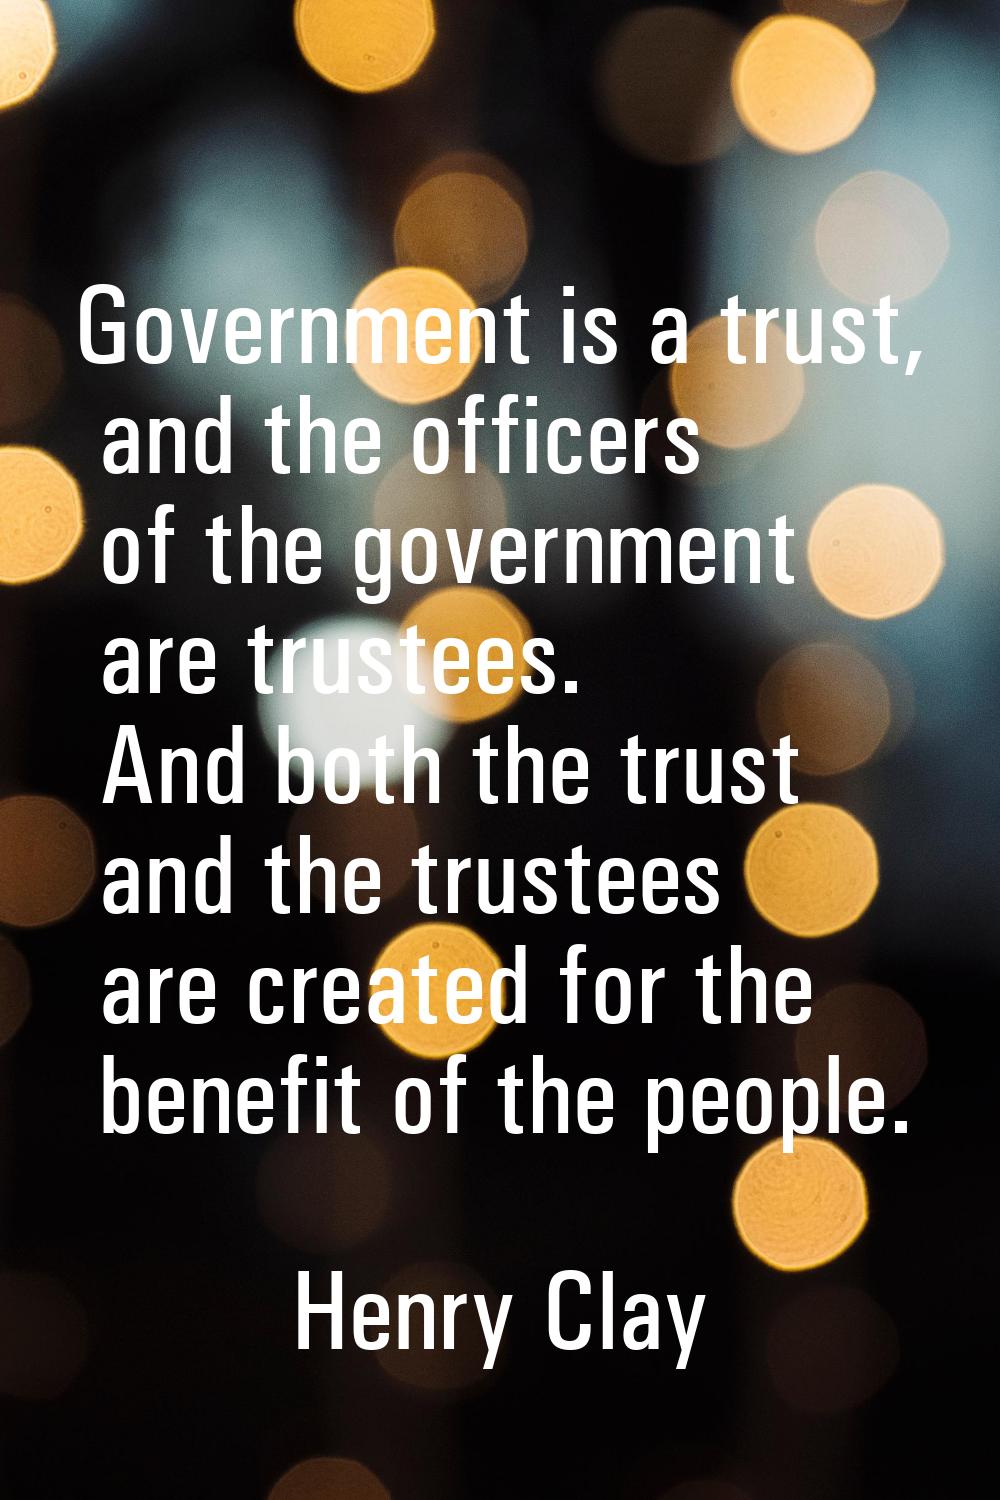 Government is a trust, and the officers of the government are trustees. And both the trust and the 